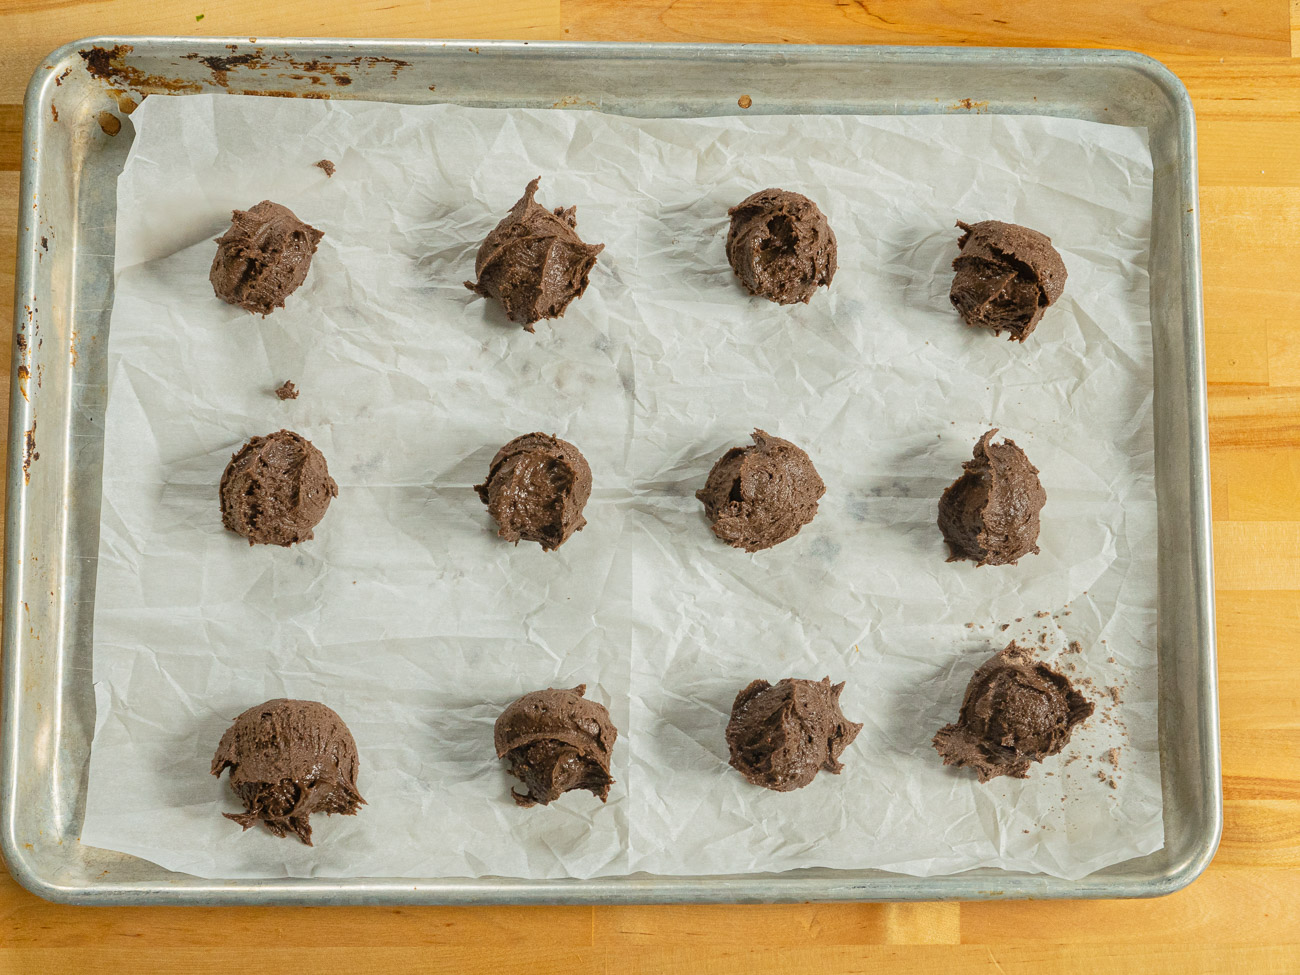 Scoop the dough onto an ungreased cookie sheet. Smooth the edges of each to form a round cookie. Bake for 12 minutes.